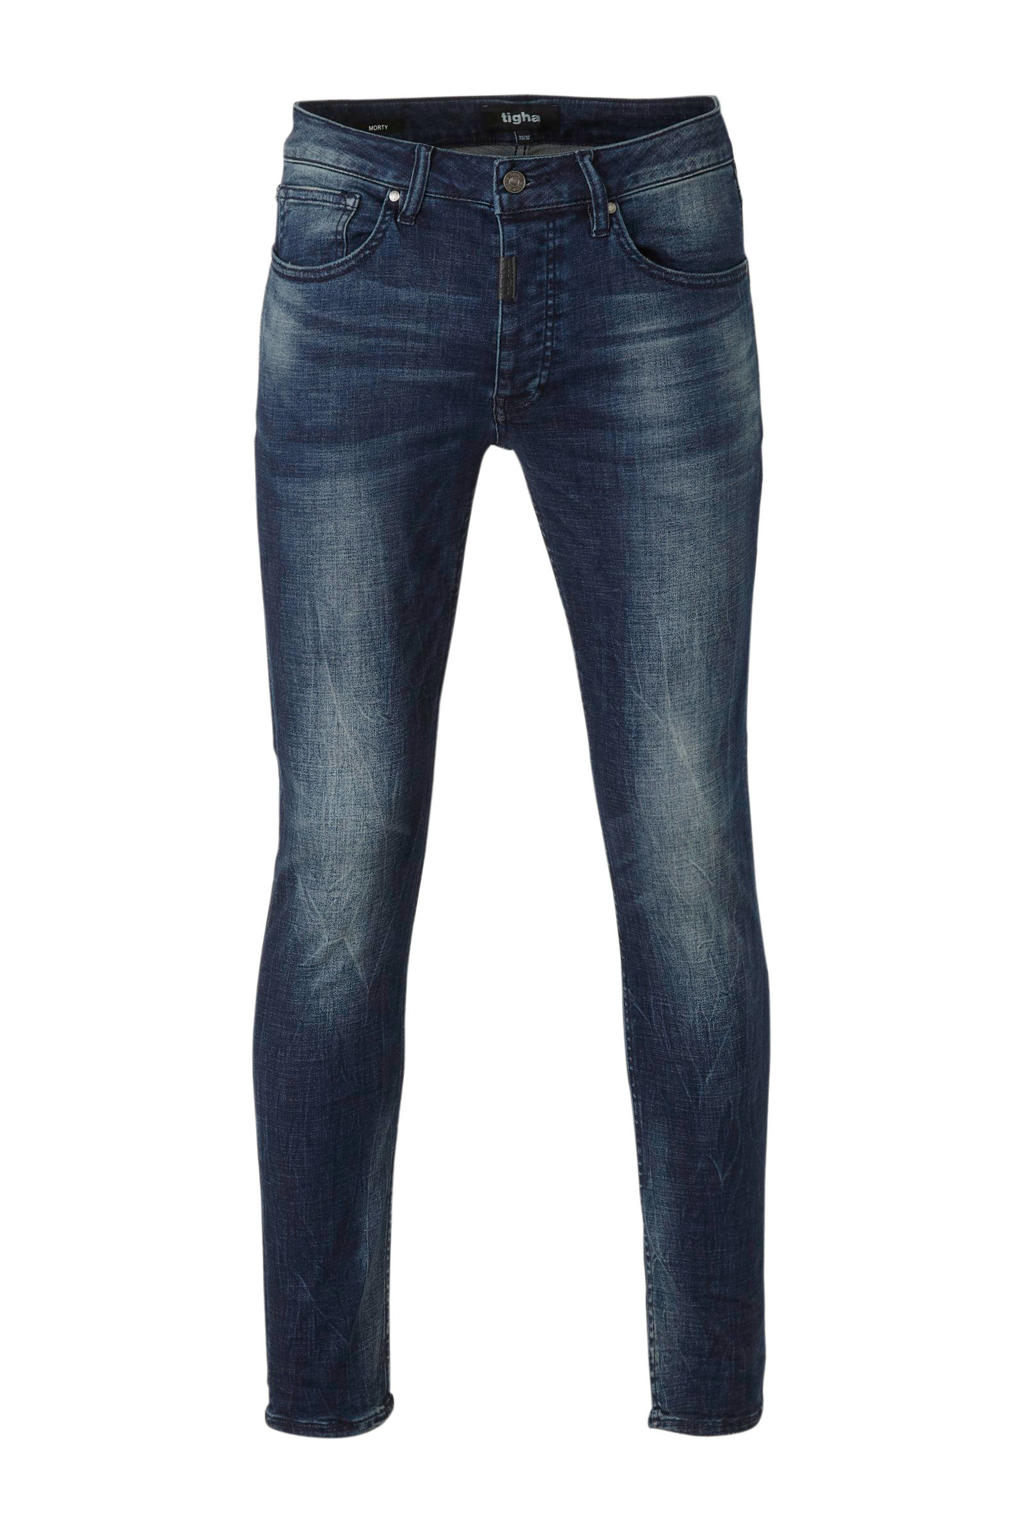 Tigha slim fit jeans Morty 522 mid blue